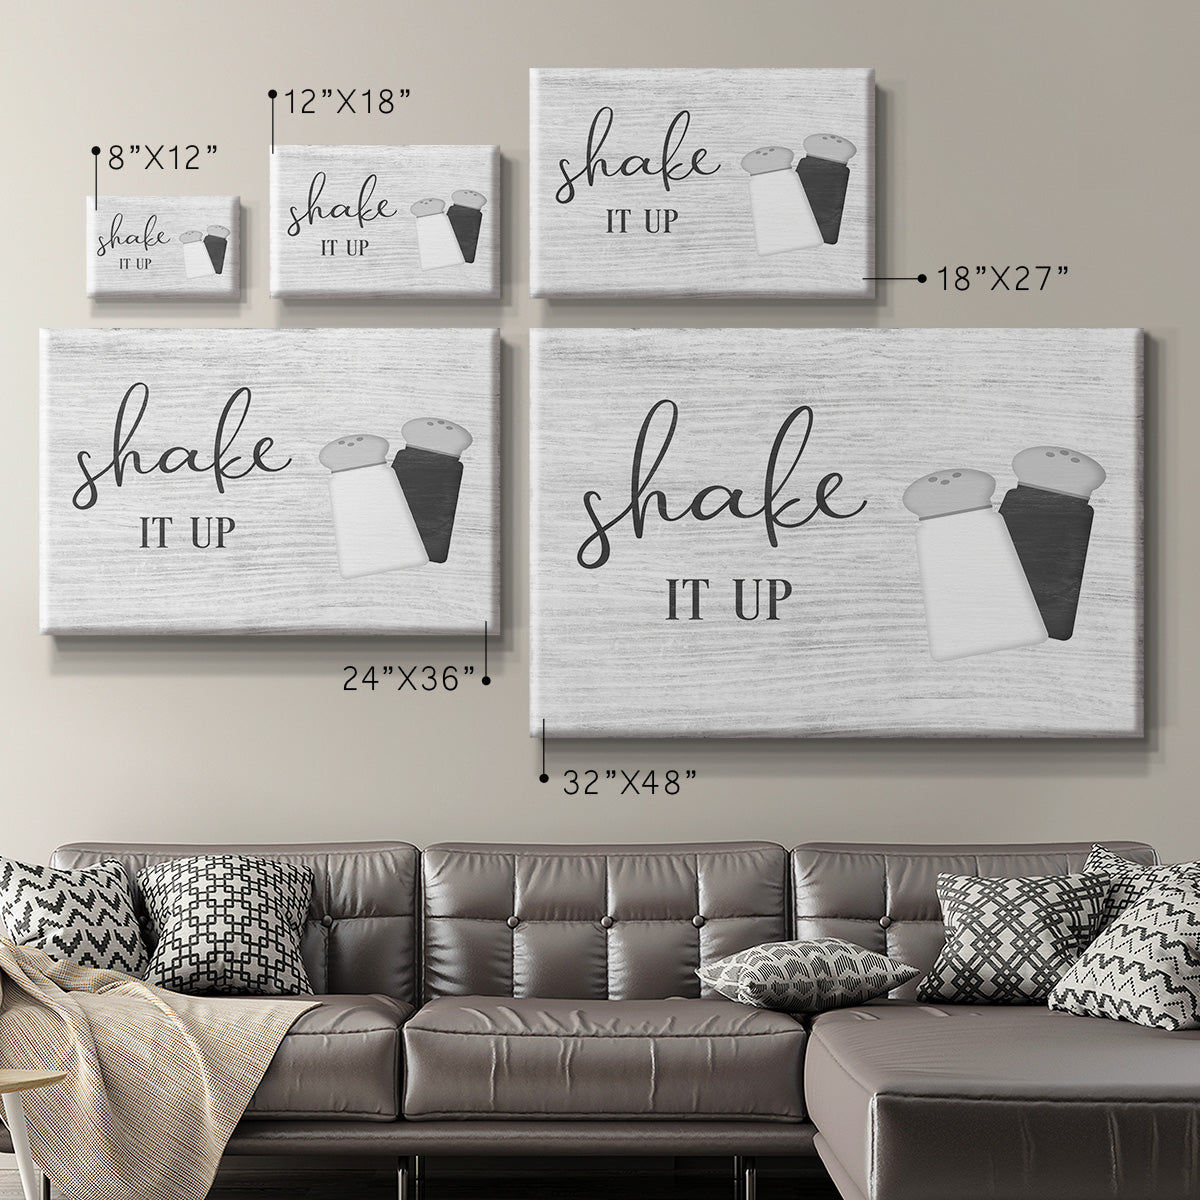 Shake it Up Premium Gallery Wrapped Canvas - Ready to Hang